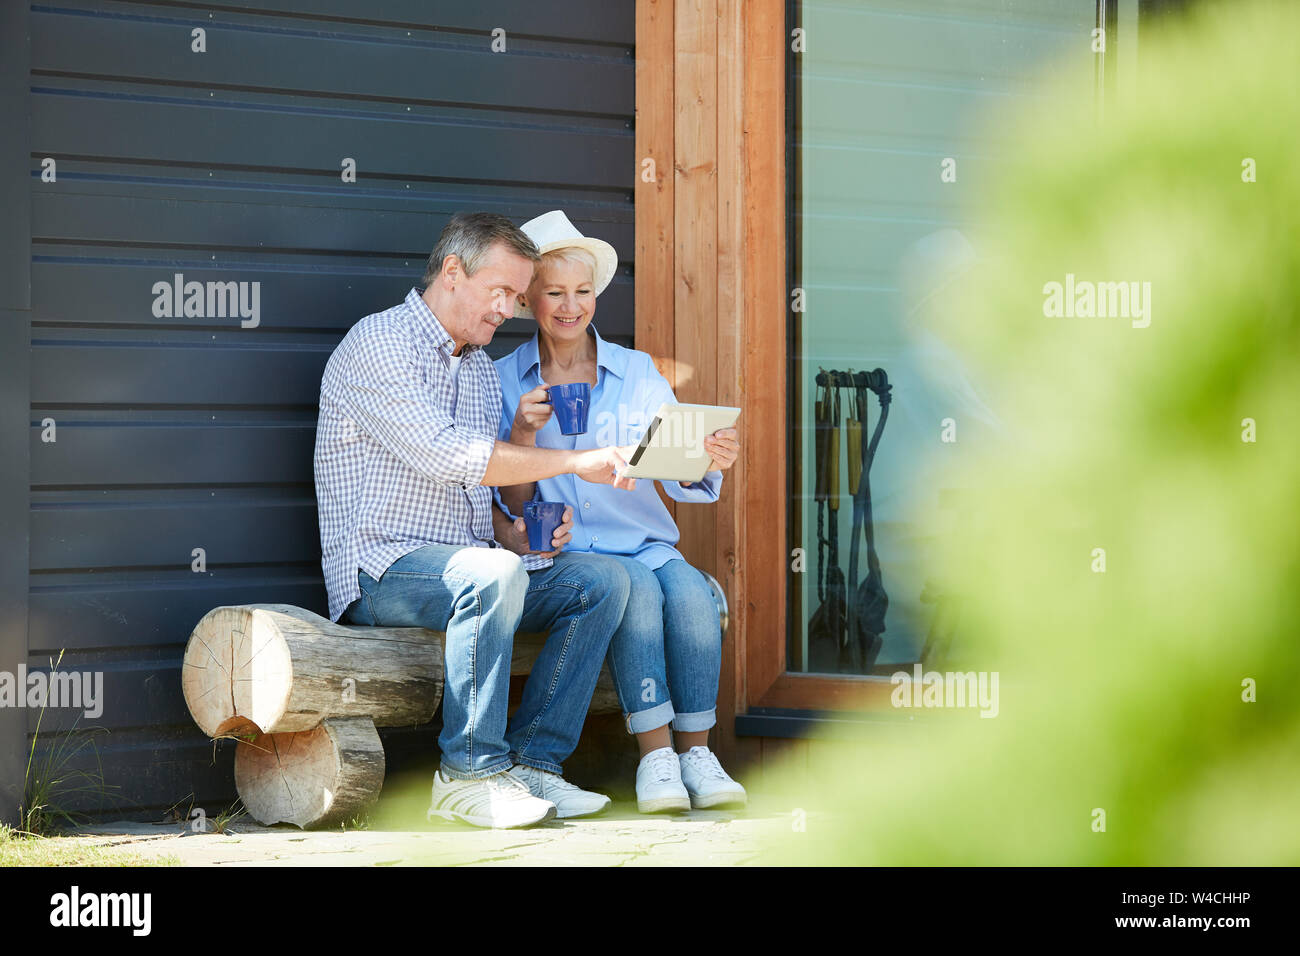 Full length portrait of contemporary mature couple using digital tablet while sitting in back yard outdoors, copy space Stock Photo